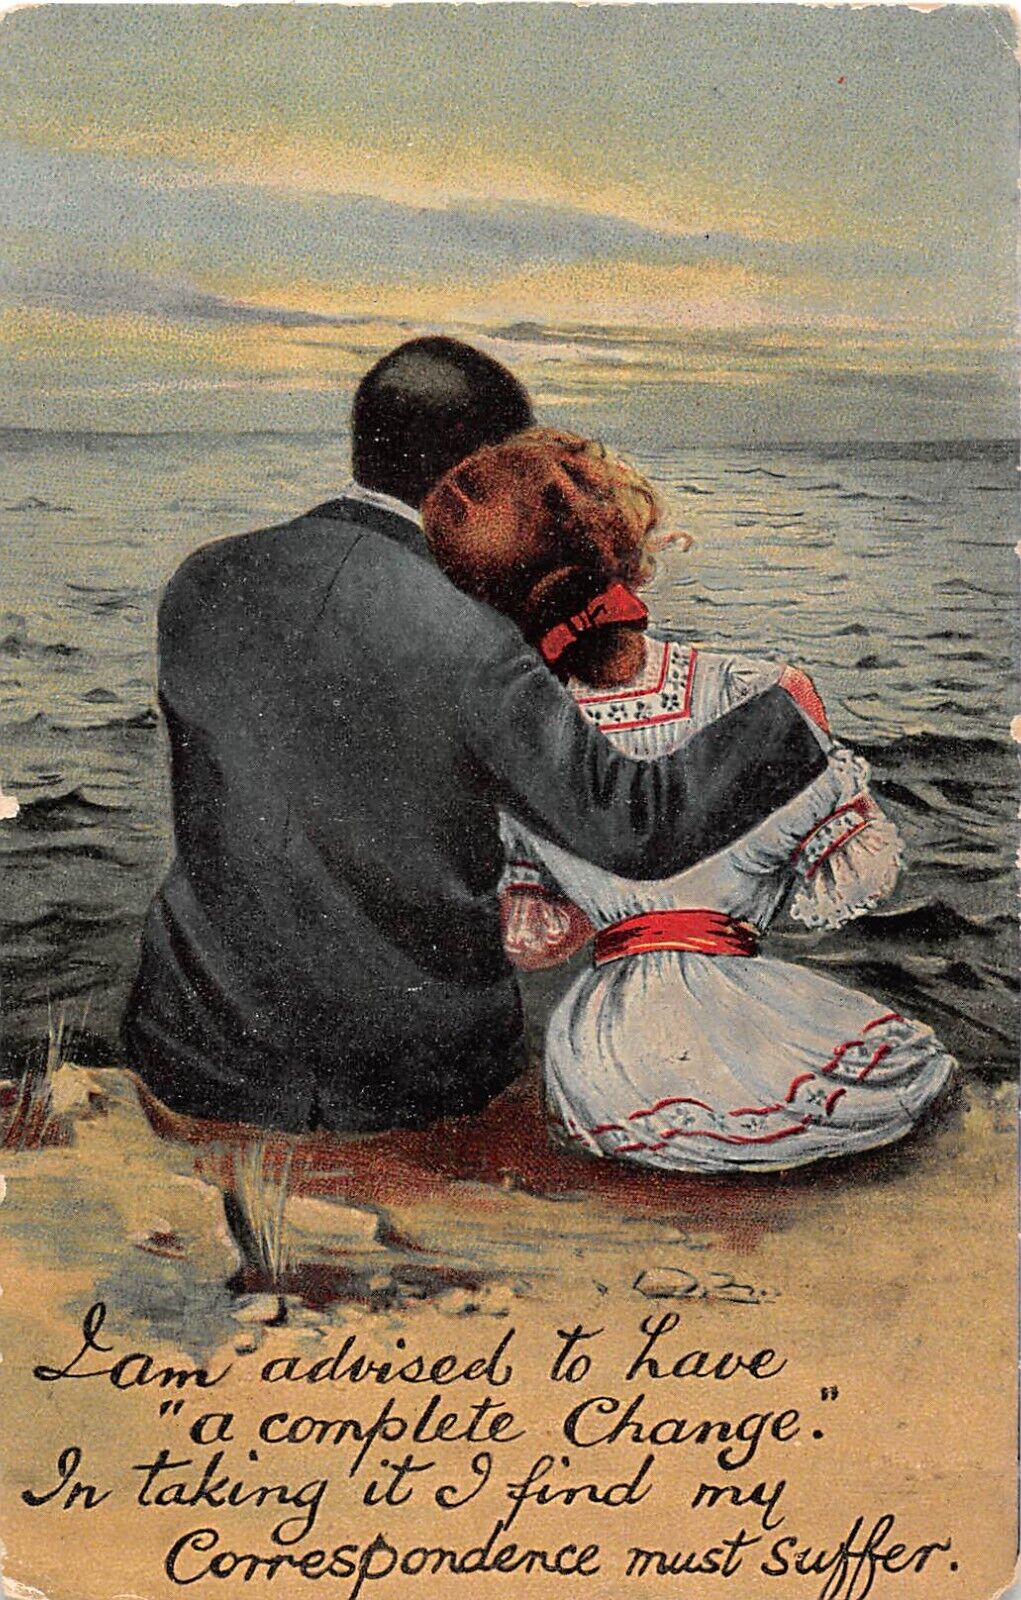 1908 Postcard-Backs of Lovers Looking Out Over the Ocean-Correspondence Suffers